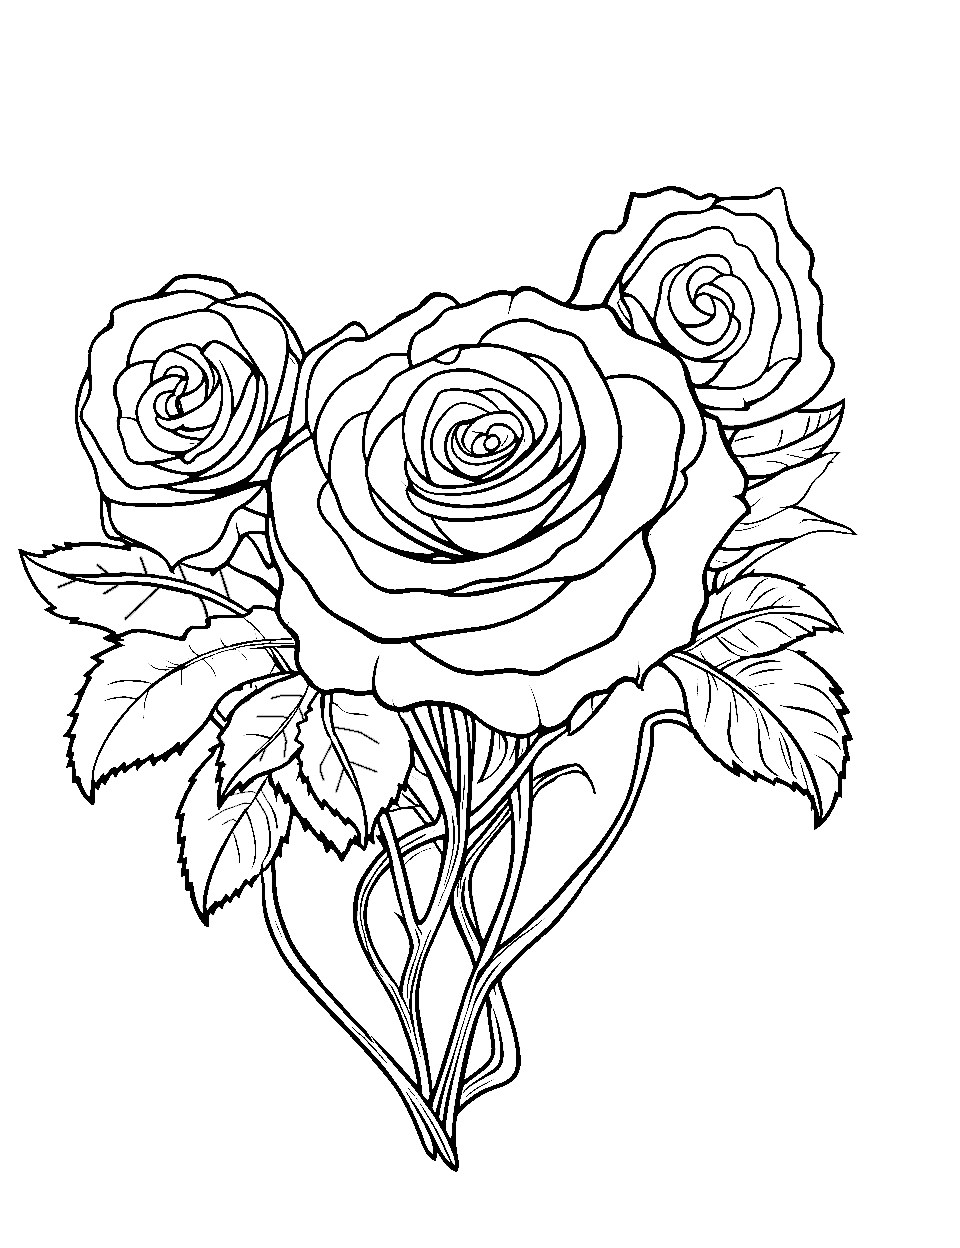 Free Printable Rose Coloring Pages for Kids and Adults